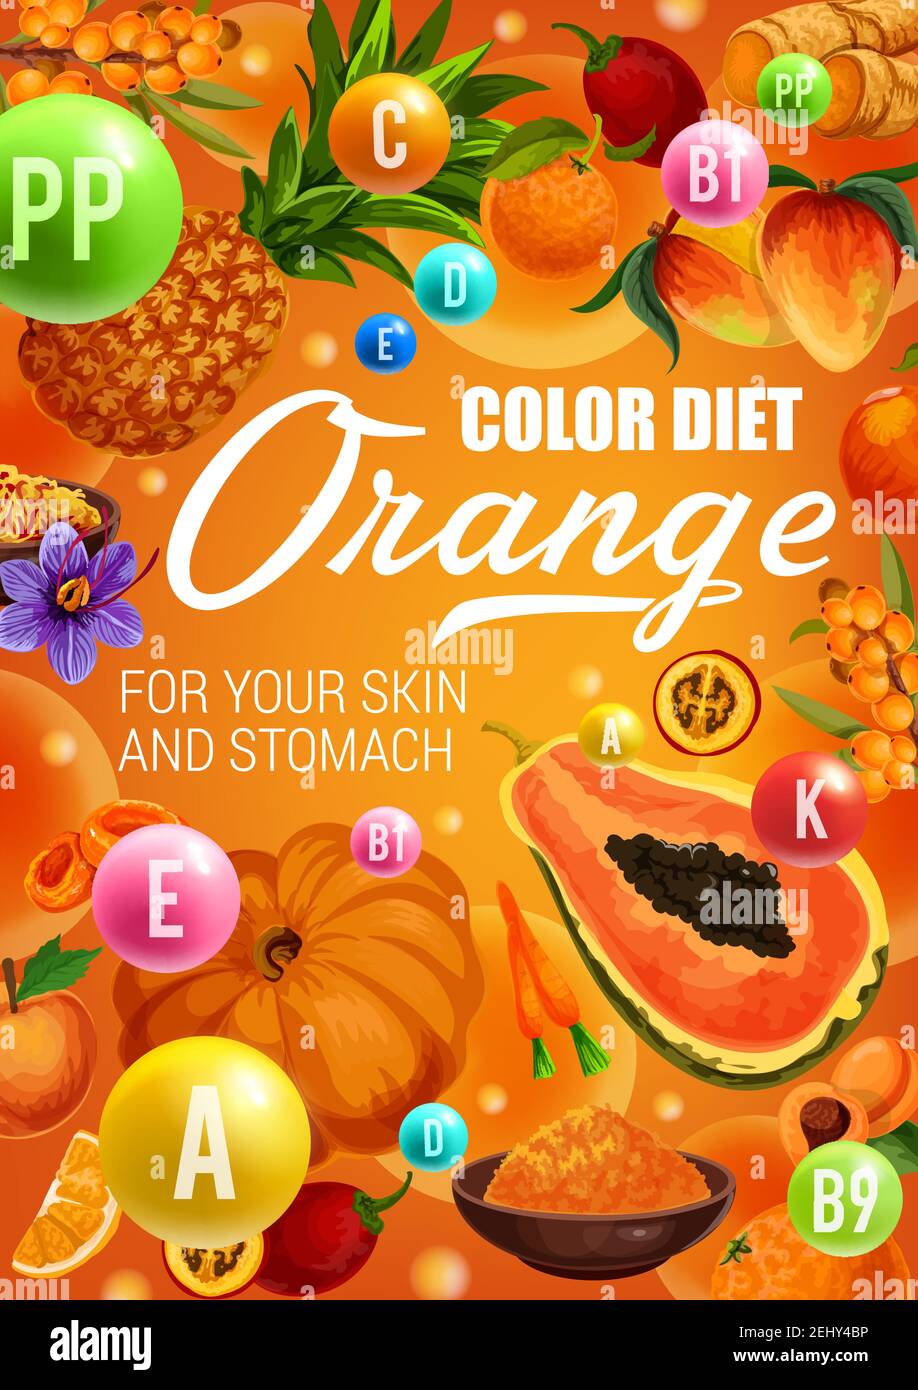 Color diet healthy food ingredients with orange fruits, vegetables, spices and berries. Skin health sources in carrot, papaya and mango, ginger, turme Stock Vector